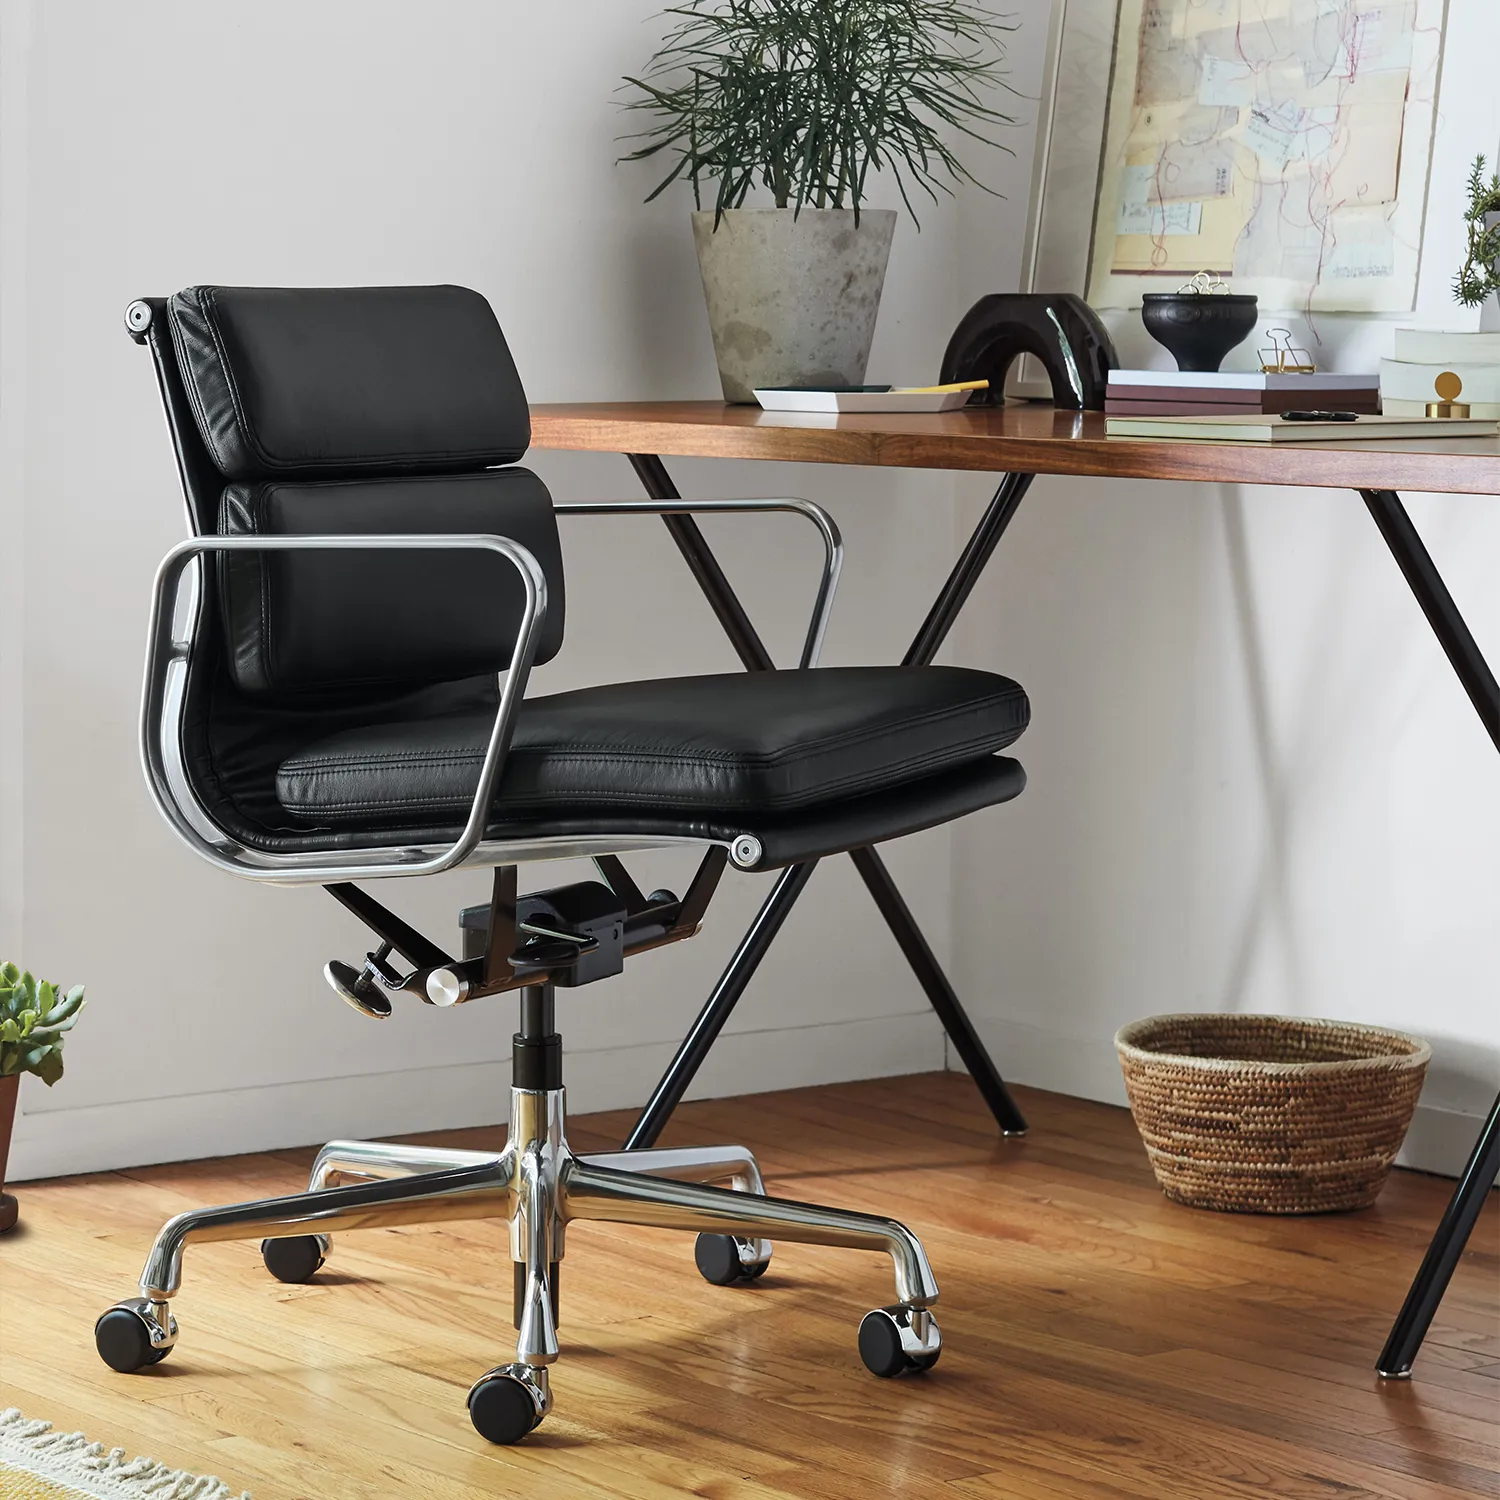 3 Best Office Chair for Heavy Person That Offer Plenty Of Support